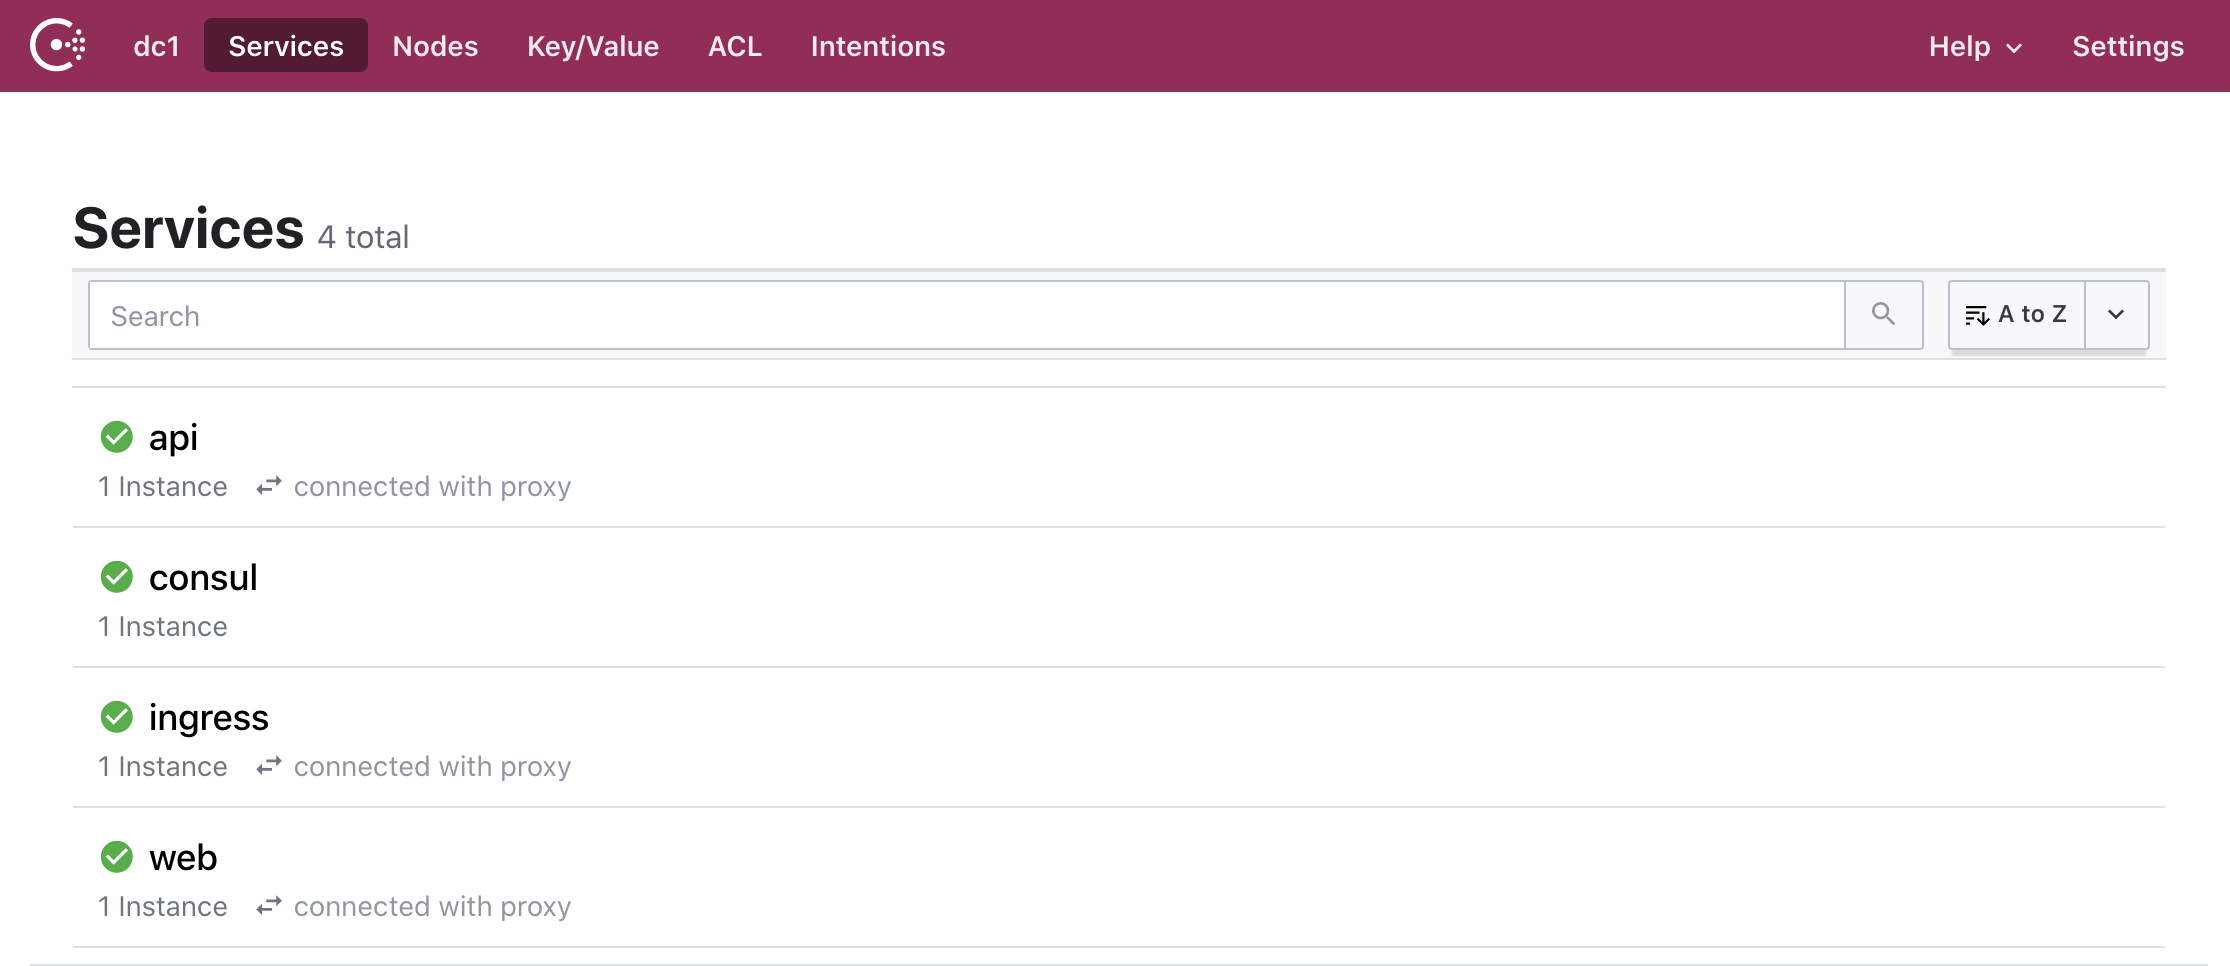 Image of Nodes page in Consul UI.